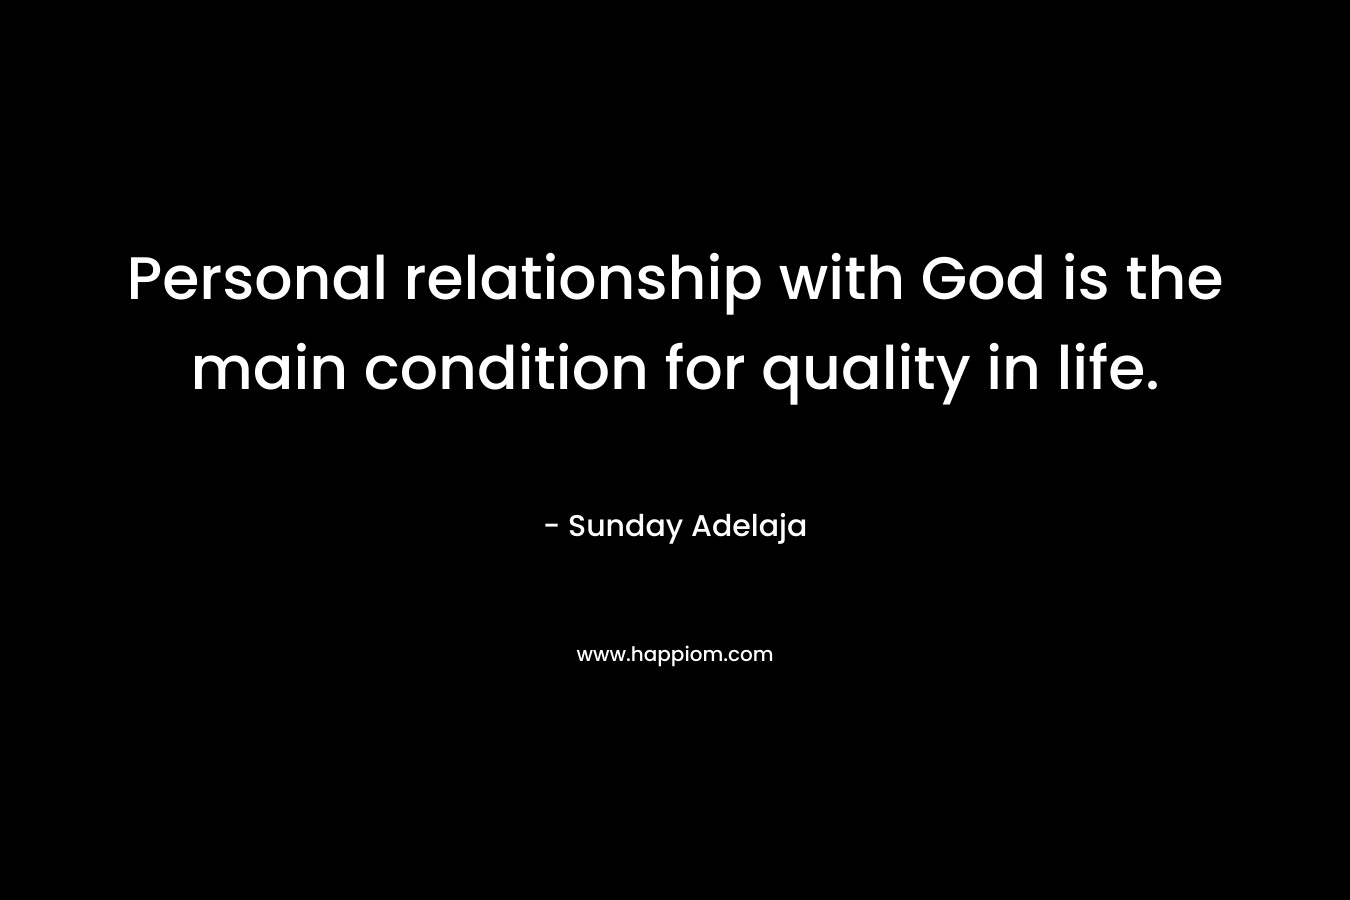 Personal relationship with God is the main condition for quality in life.